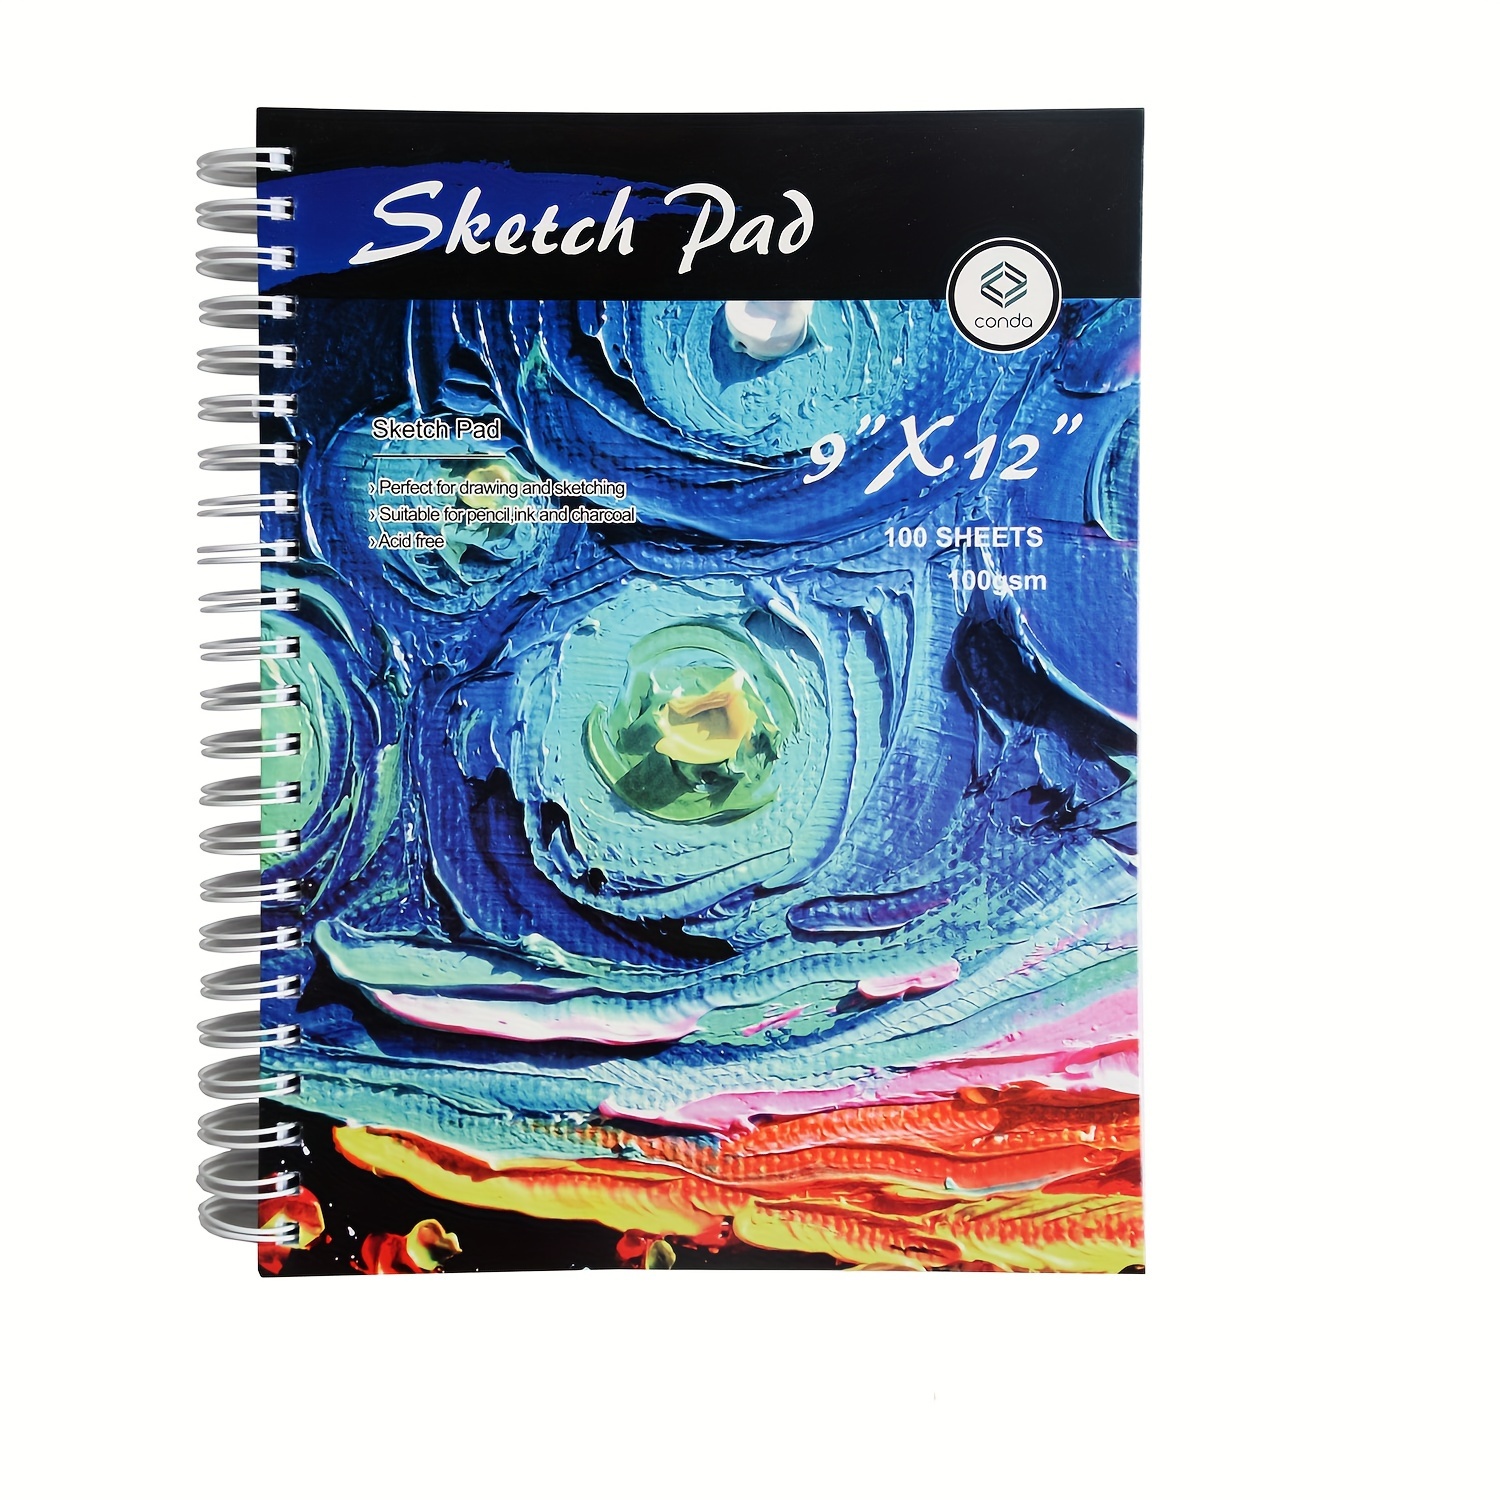  9 x 12 inches Hardcover Sketchbook for Drawing 120 Sheets  Spiral Bound Sketch Pad Premium Art Sketchbook Artistic Drawing Painting  Writing Paper(68lb/100gsm) for Kids Adults Beginners Artists, Black :  Office Products